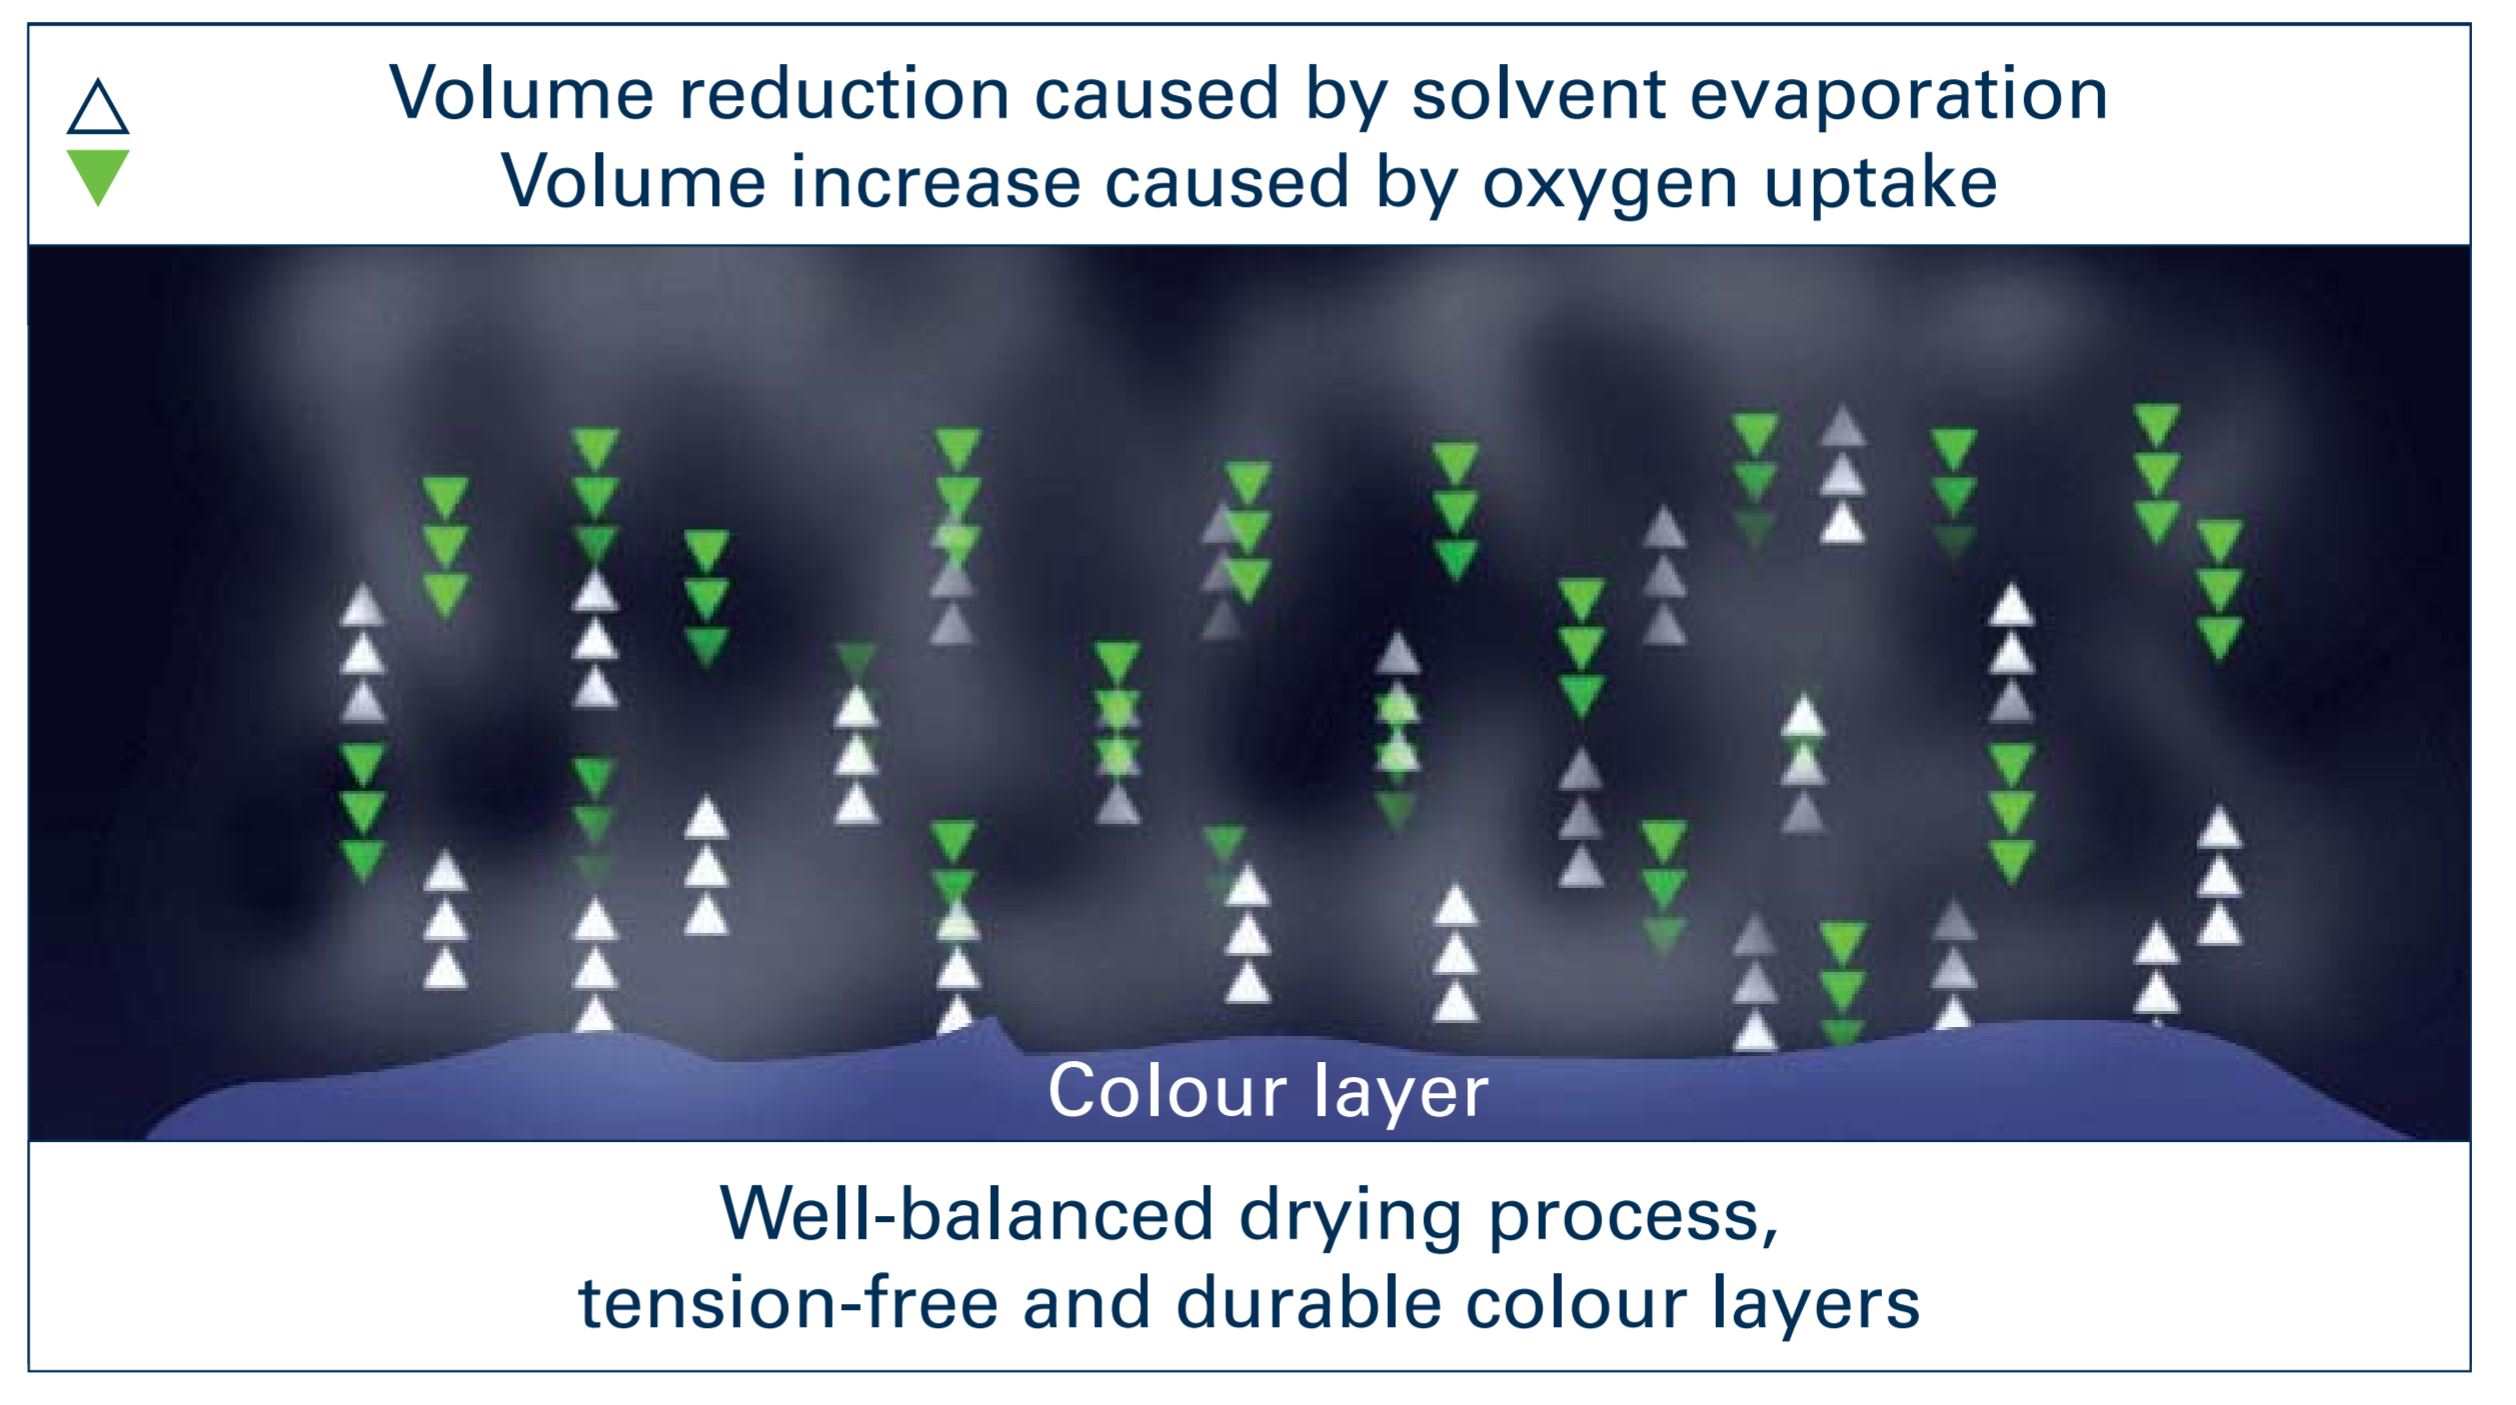 Volume reduction caused by solvent evaporation volume increased by oxygen uptake. Well-balanced drying process tension-free and durable colour layers